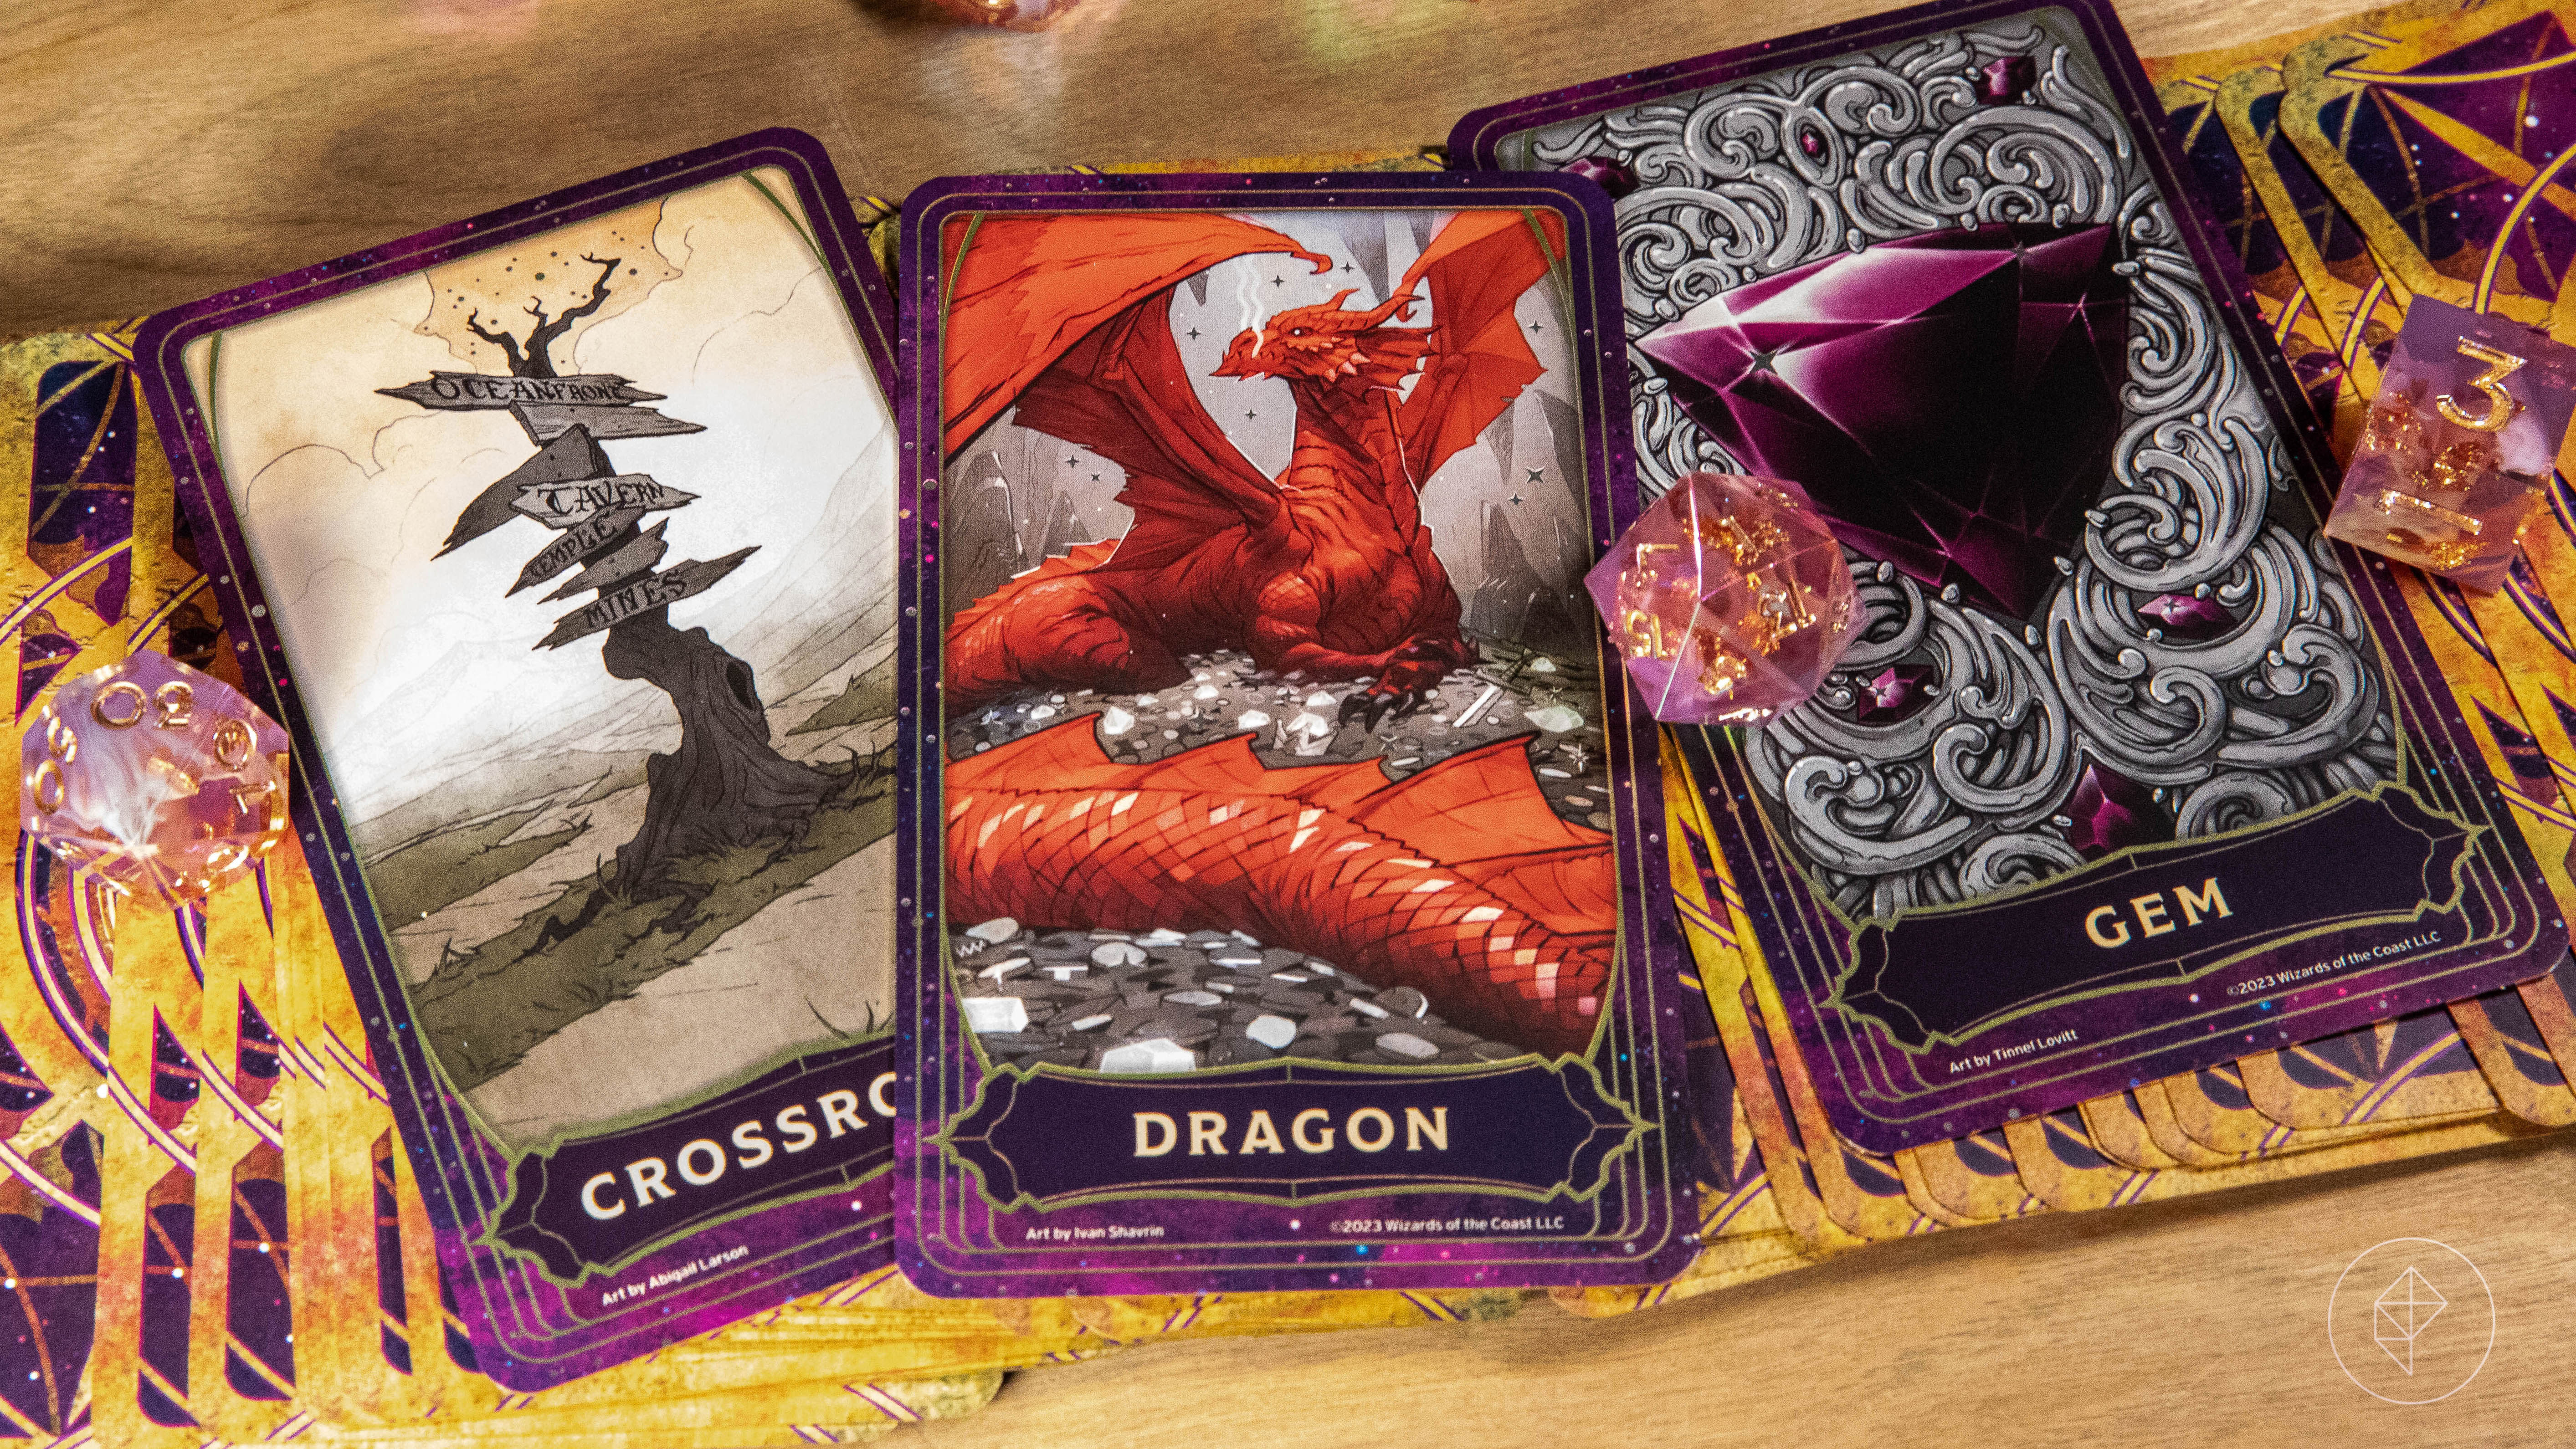 Three face-up cards, including crossroads, dragon, and gem, sit atop a deck of cards that are face down, with pink dice on top of them.